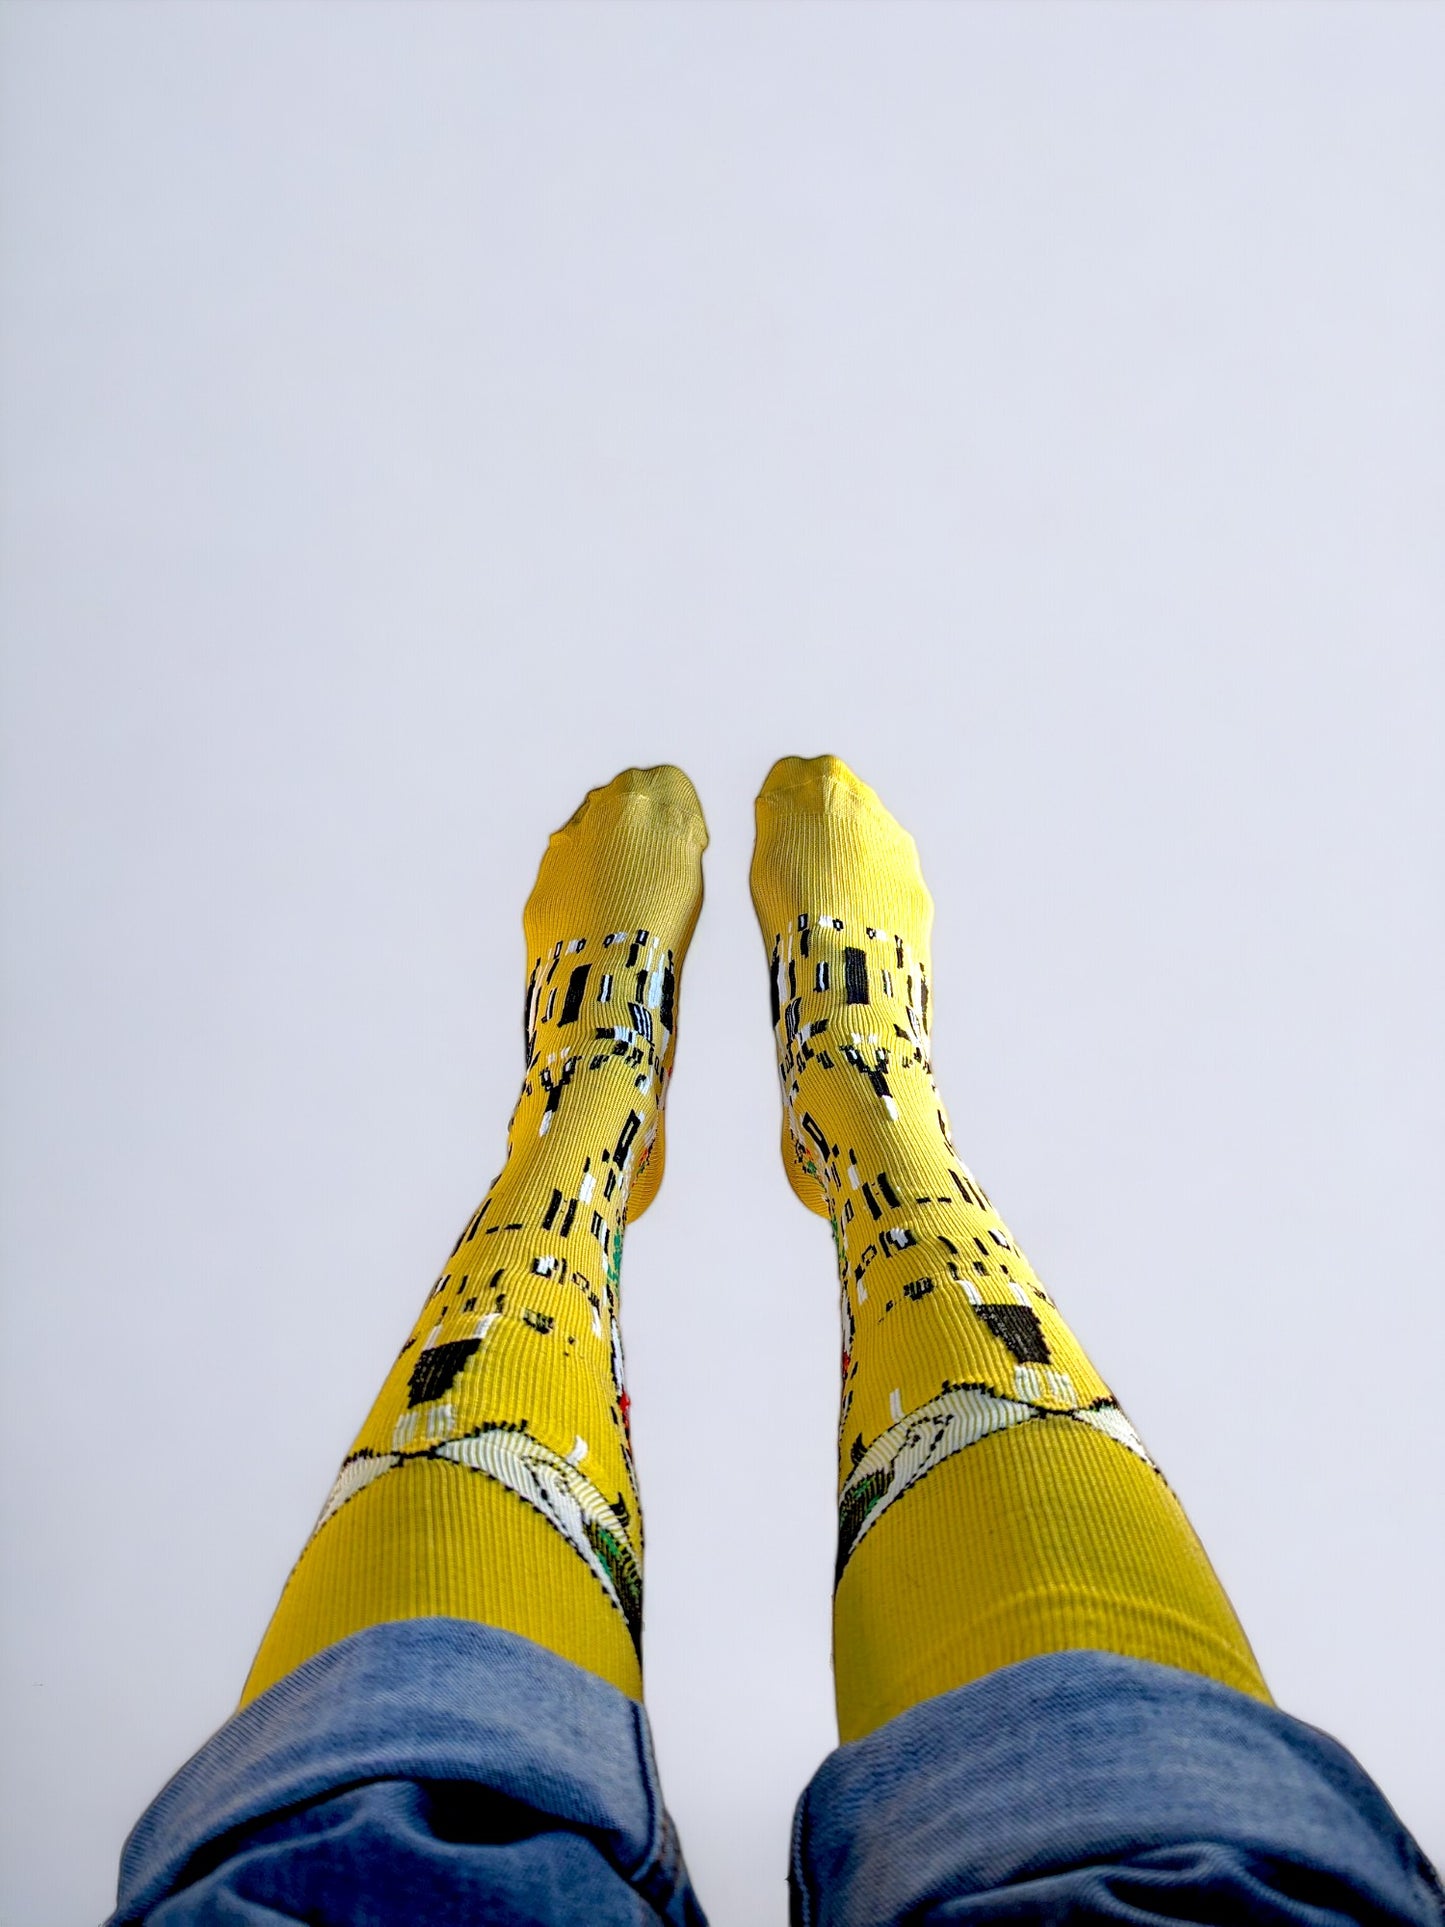 A pair of legs wearing yellow compression socks with the famous painting 'Kiss' printed on it.